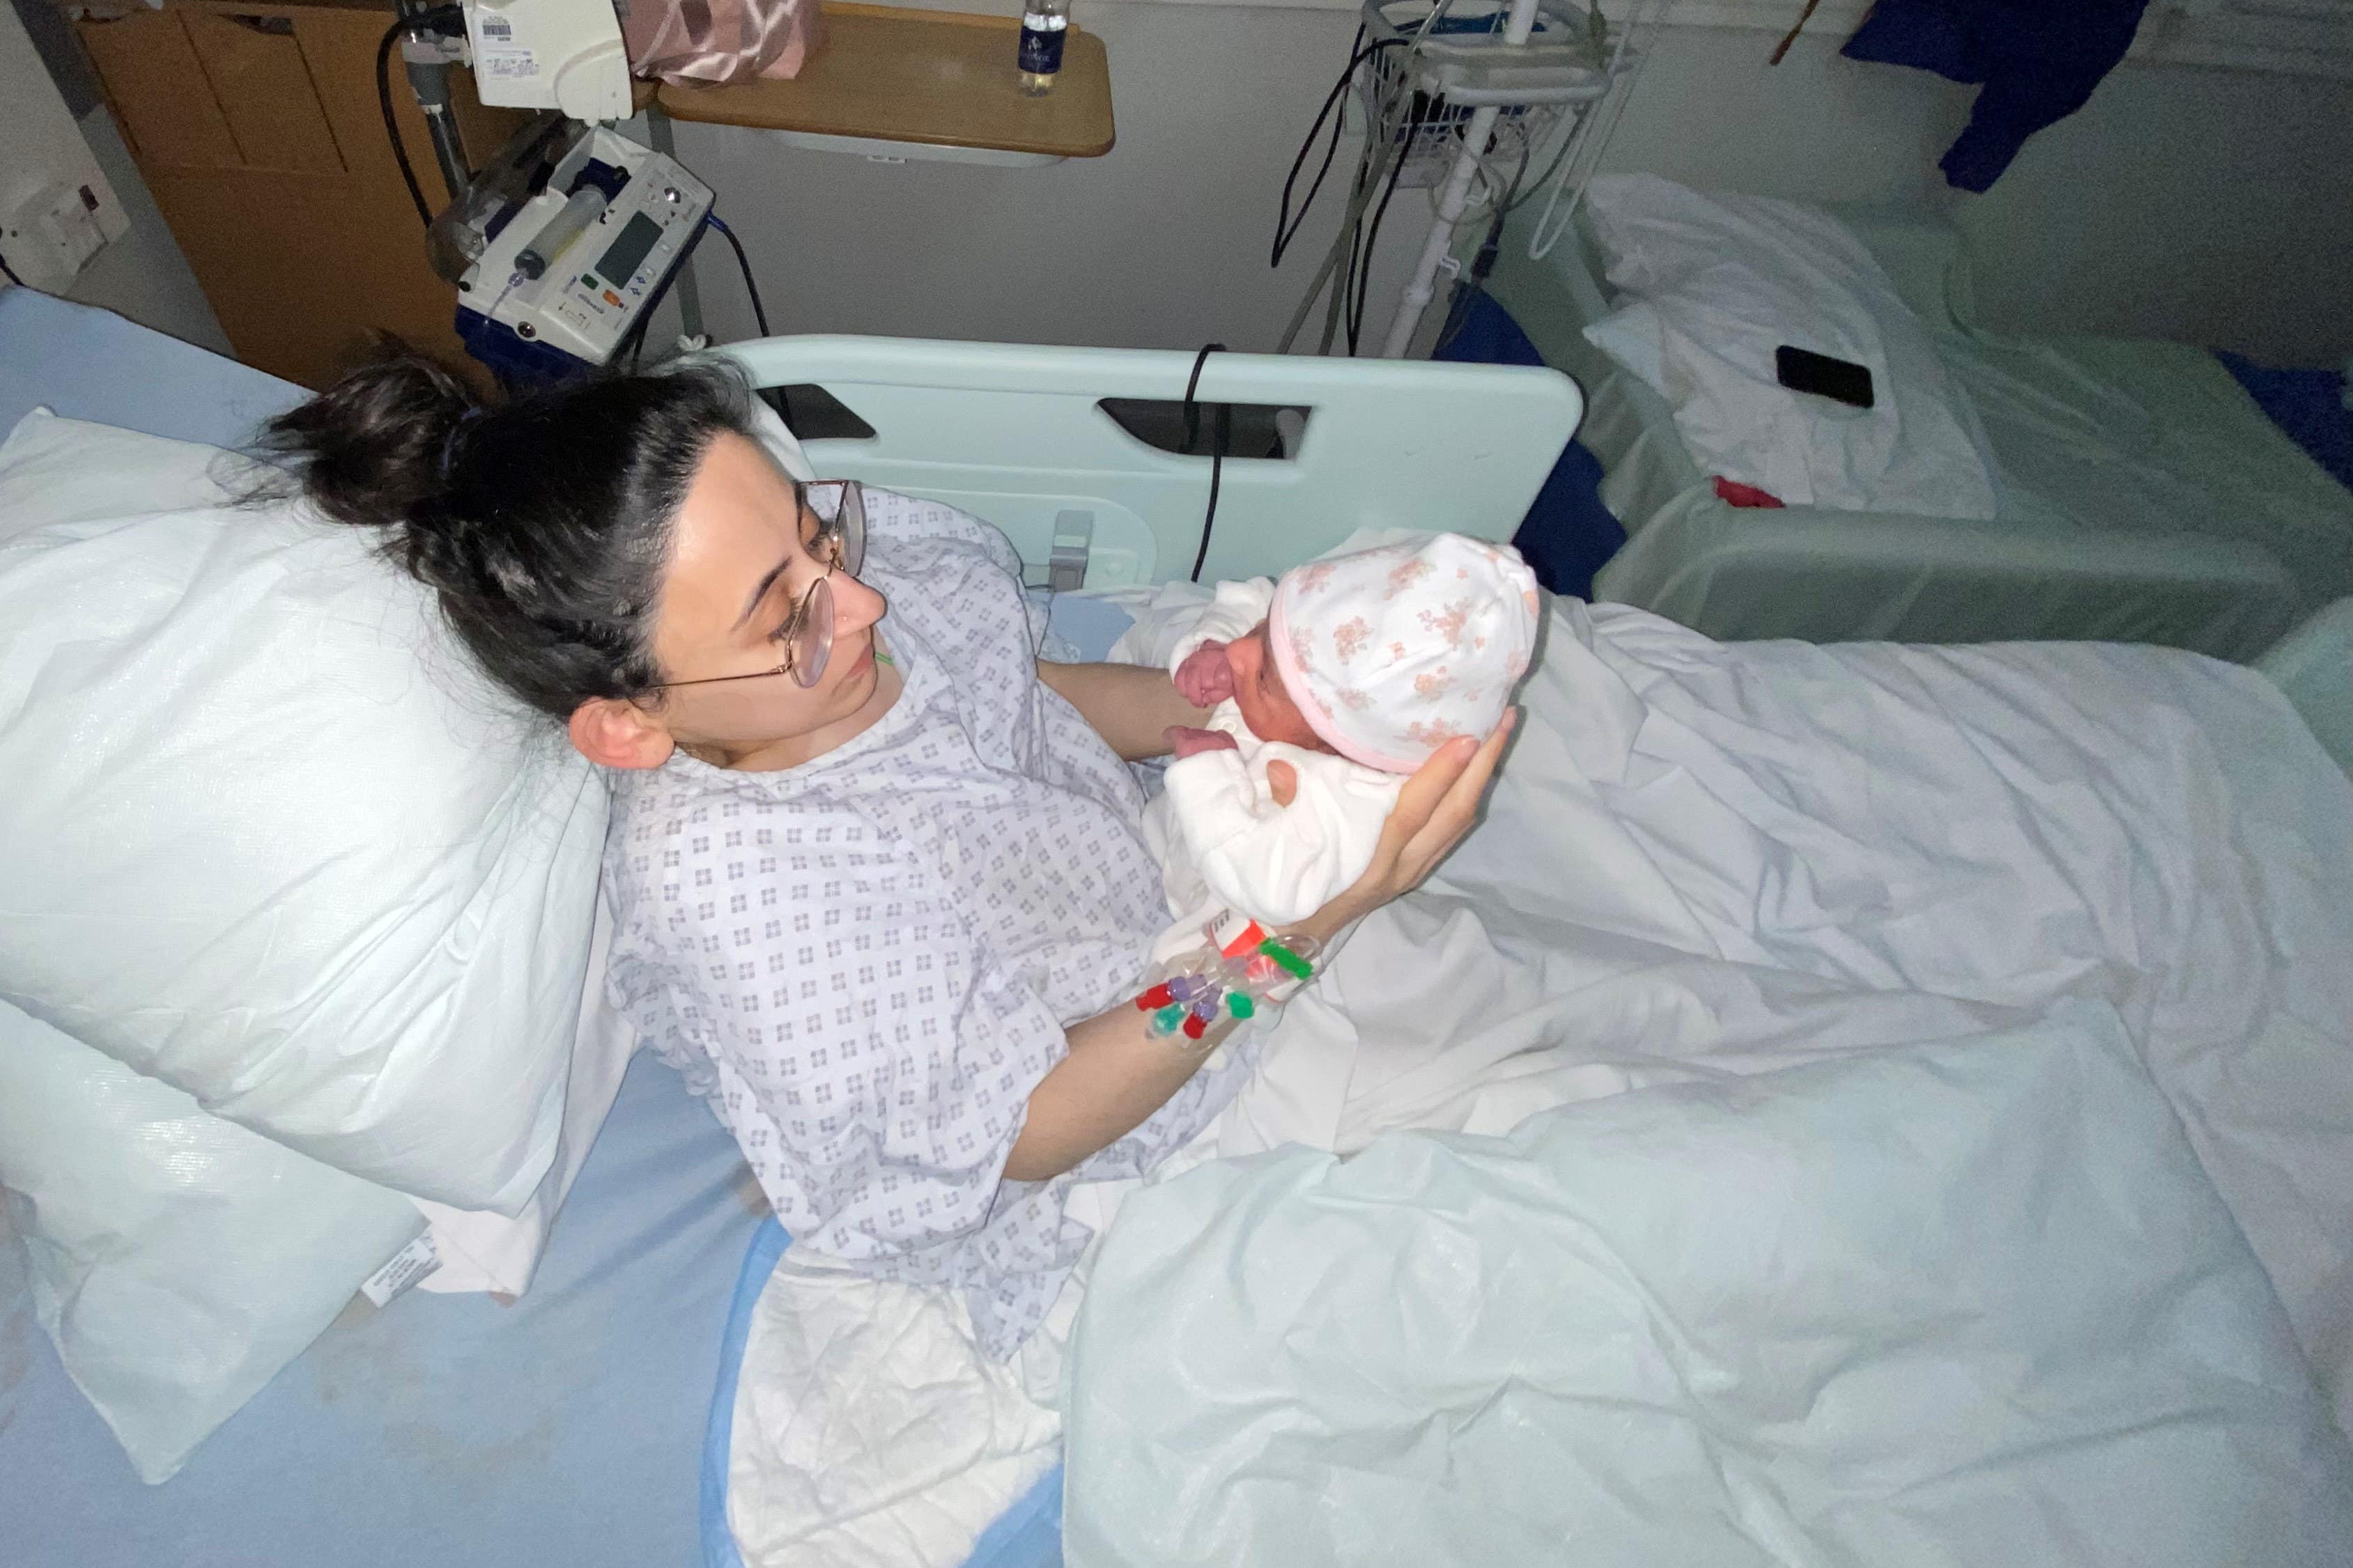 Hira Ahmad gave birth via C-section after specialist care at St George’s Hospital (Ather Amin)